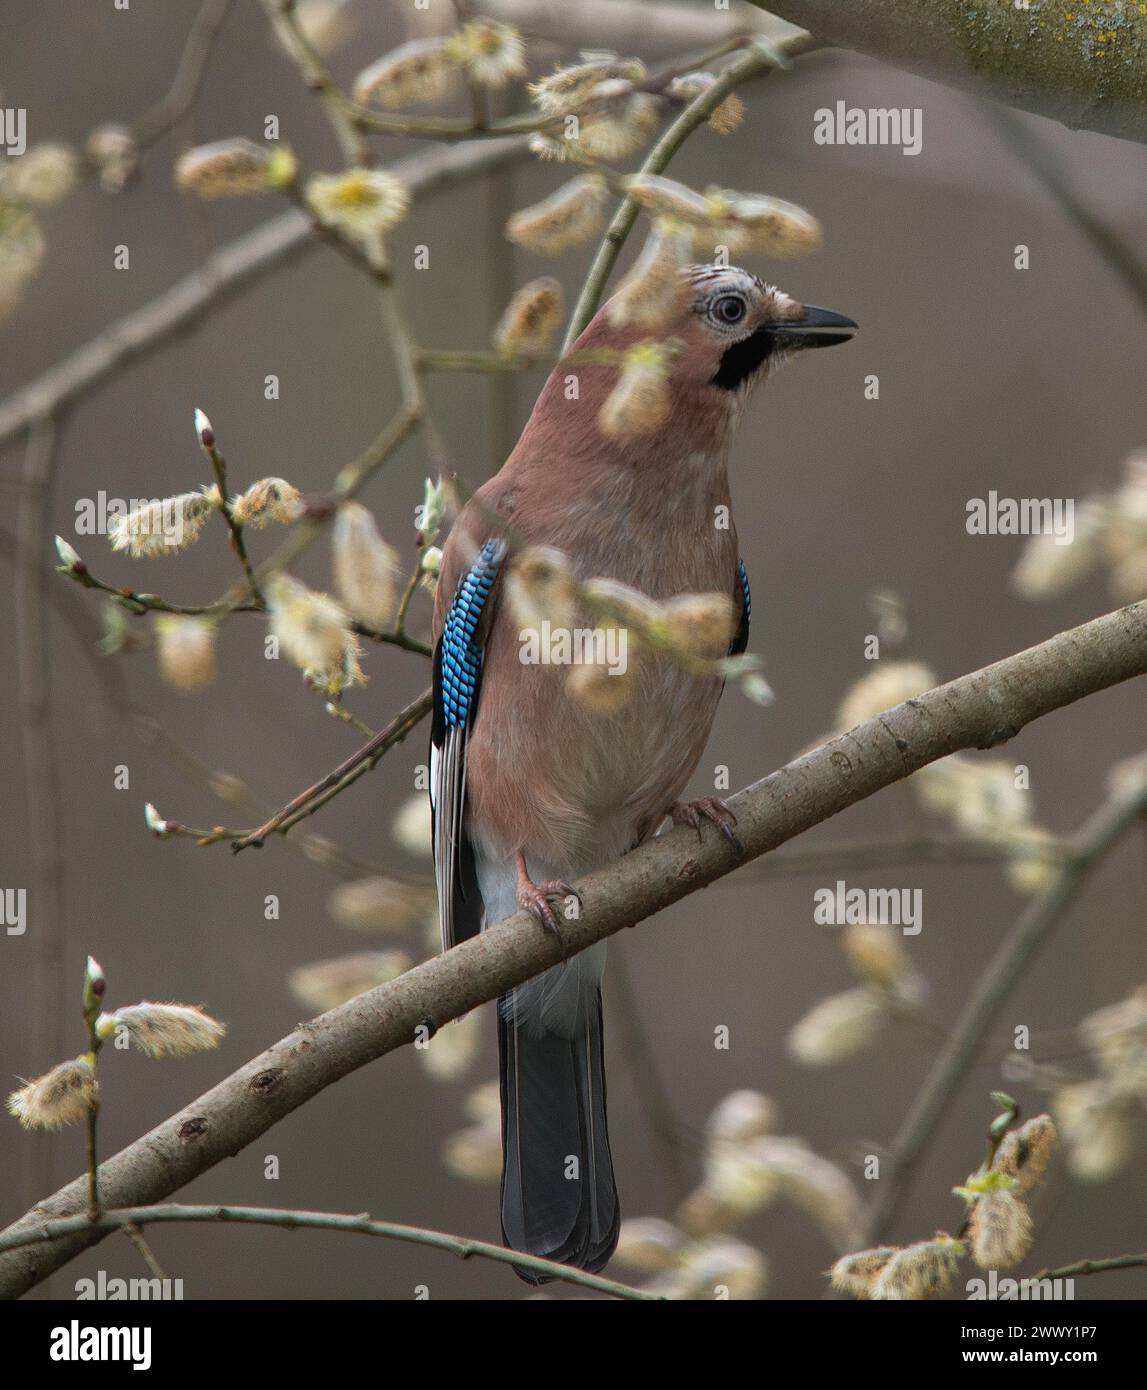 Jay perched on branch in woodland showing full colours of plumage and looking to the right in image Stock Photo